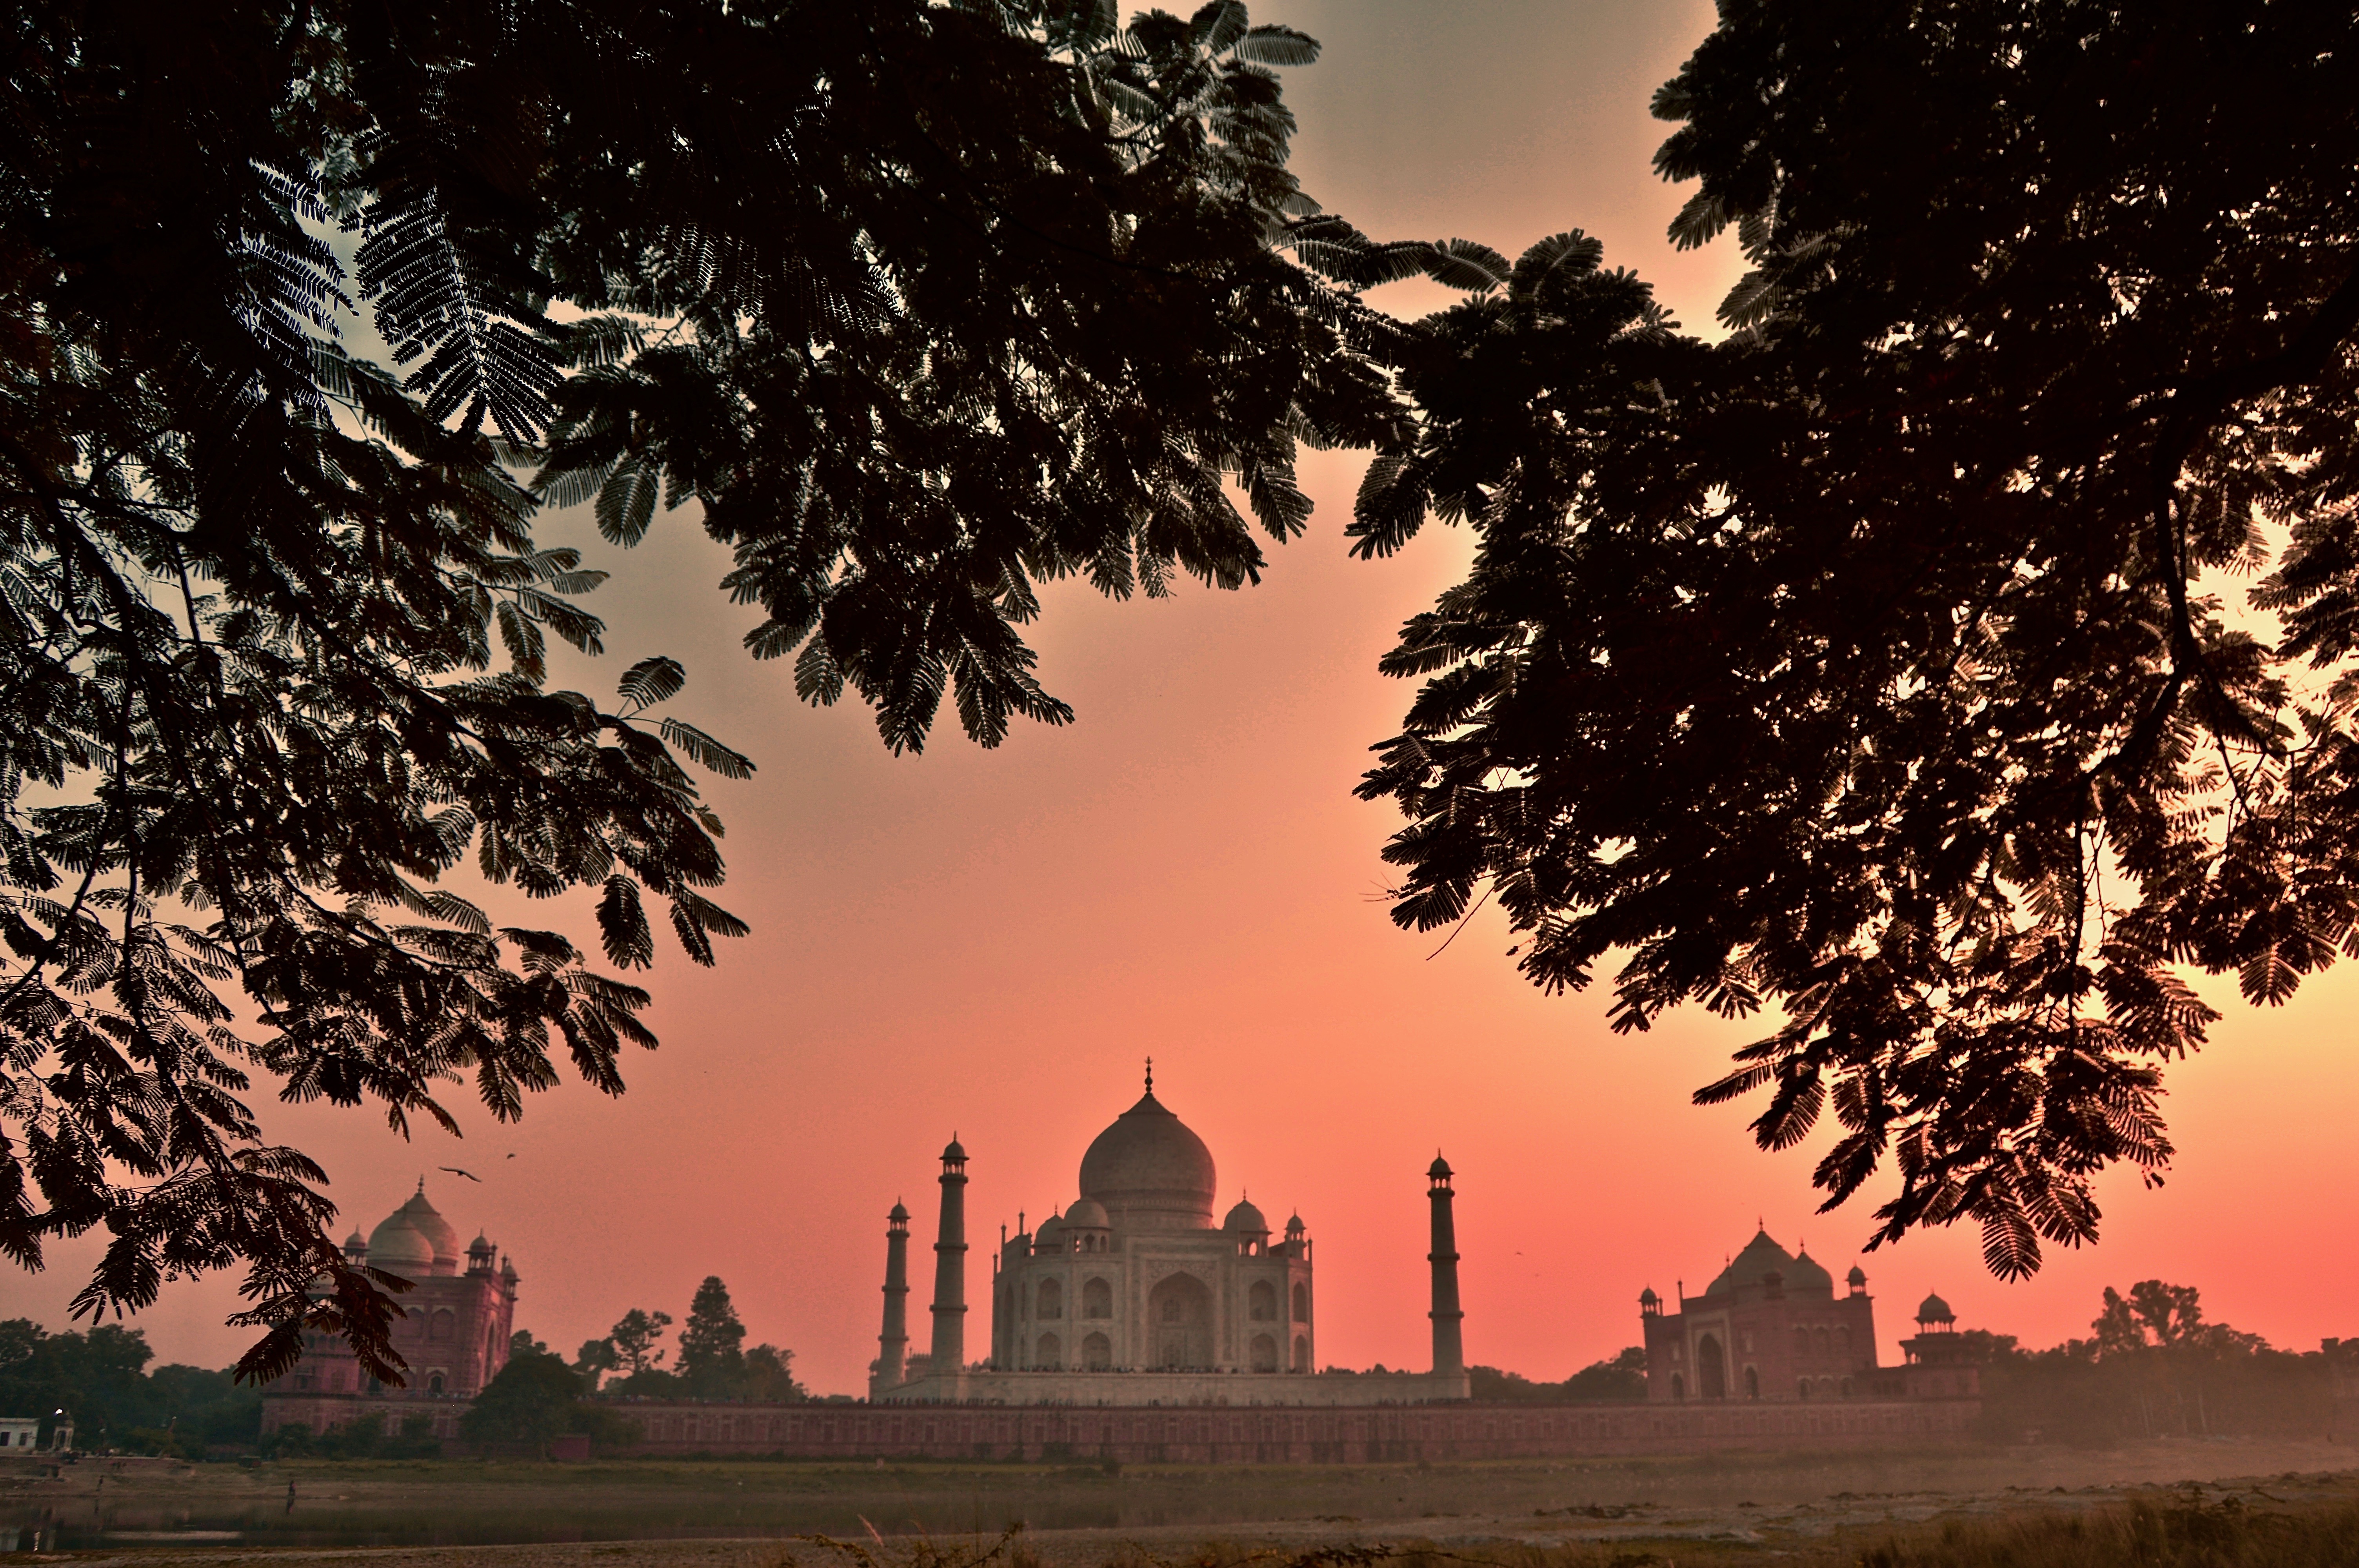 A Photo Journey Through India’s Golden Triangle